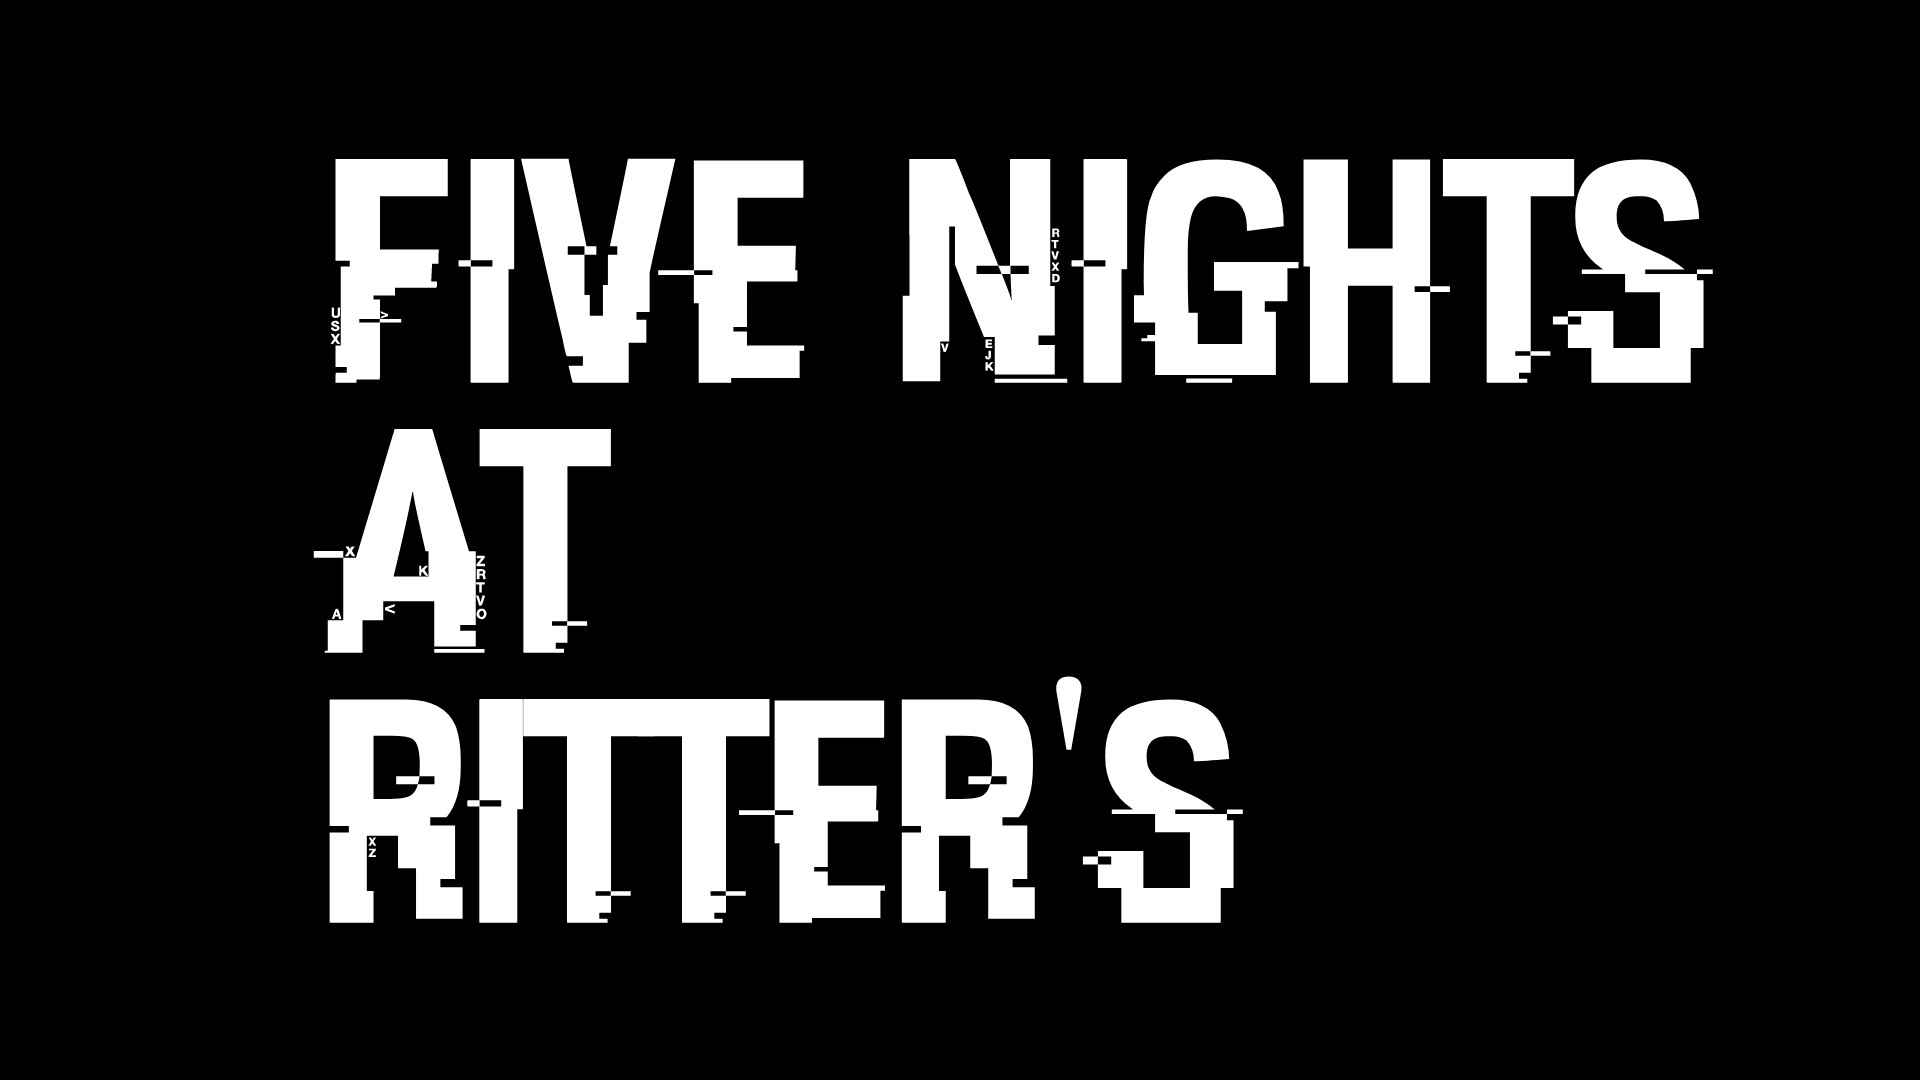 Five Nights At Ritter's